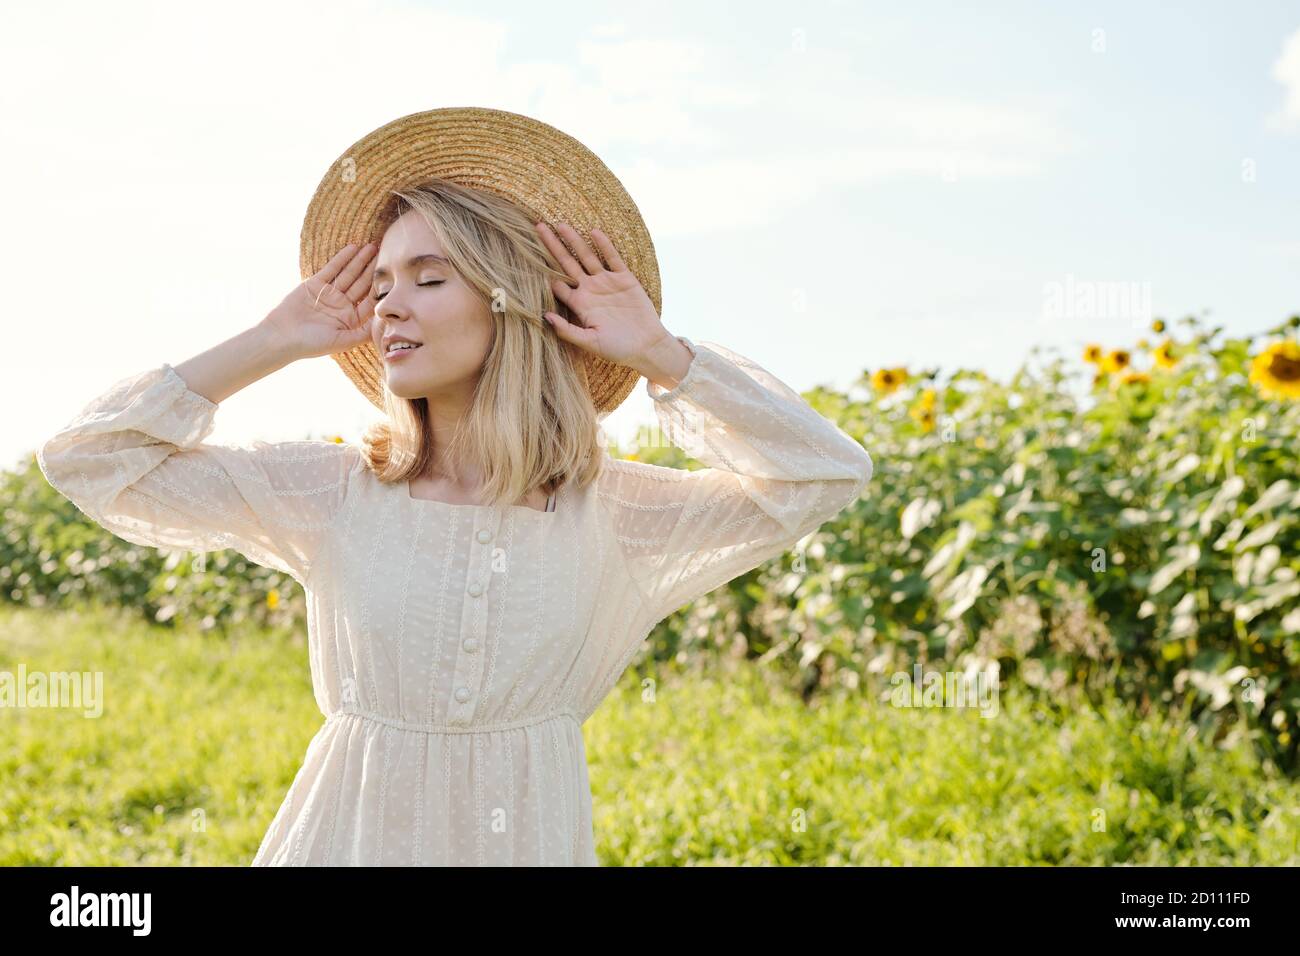 Beautiful young blond woman in straw hat and white dress keeping eyes closed Stock Photo